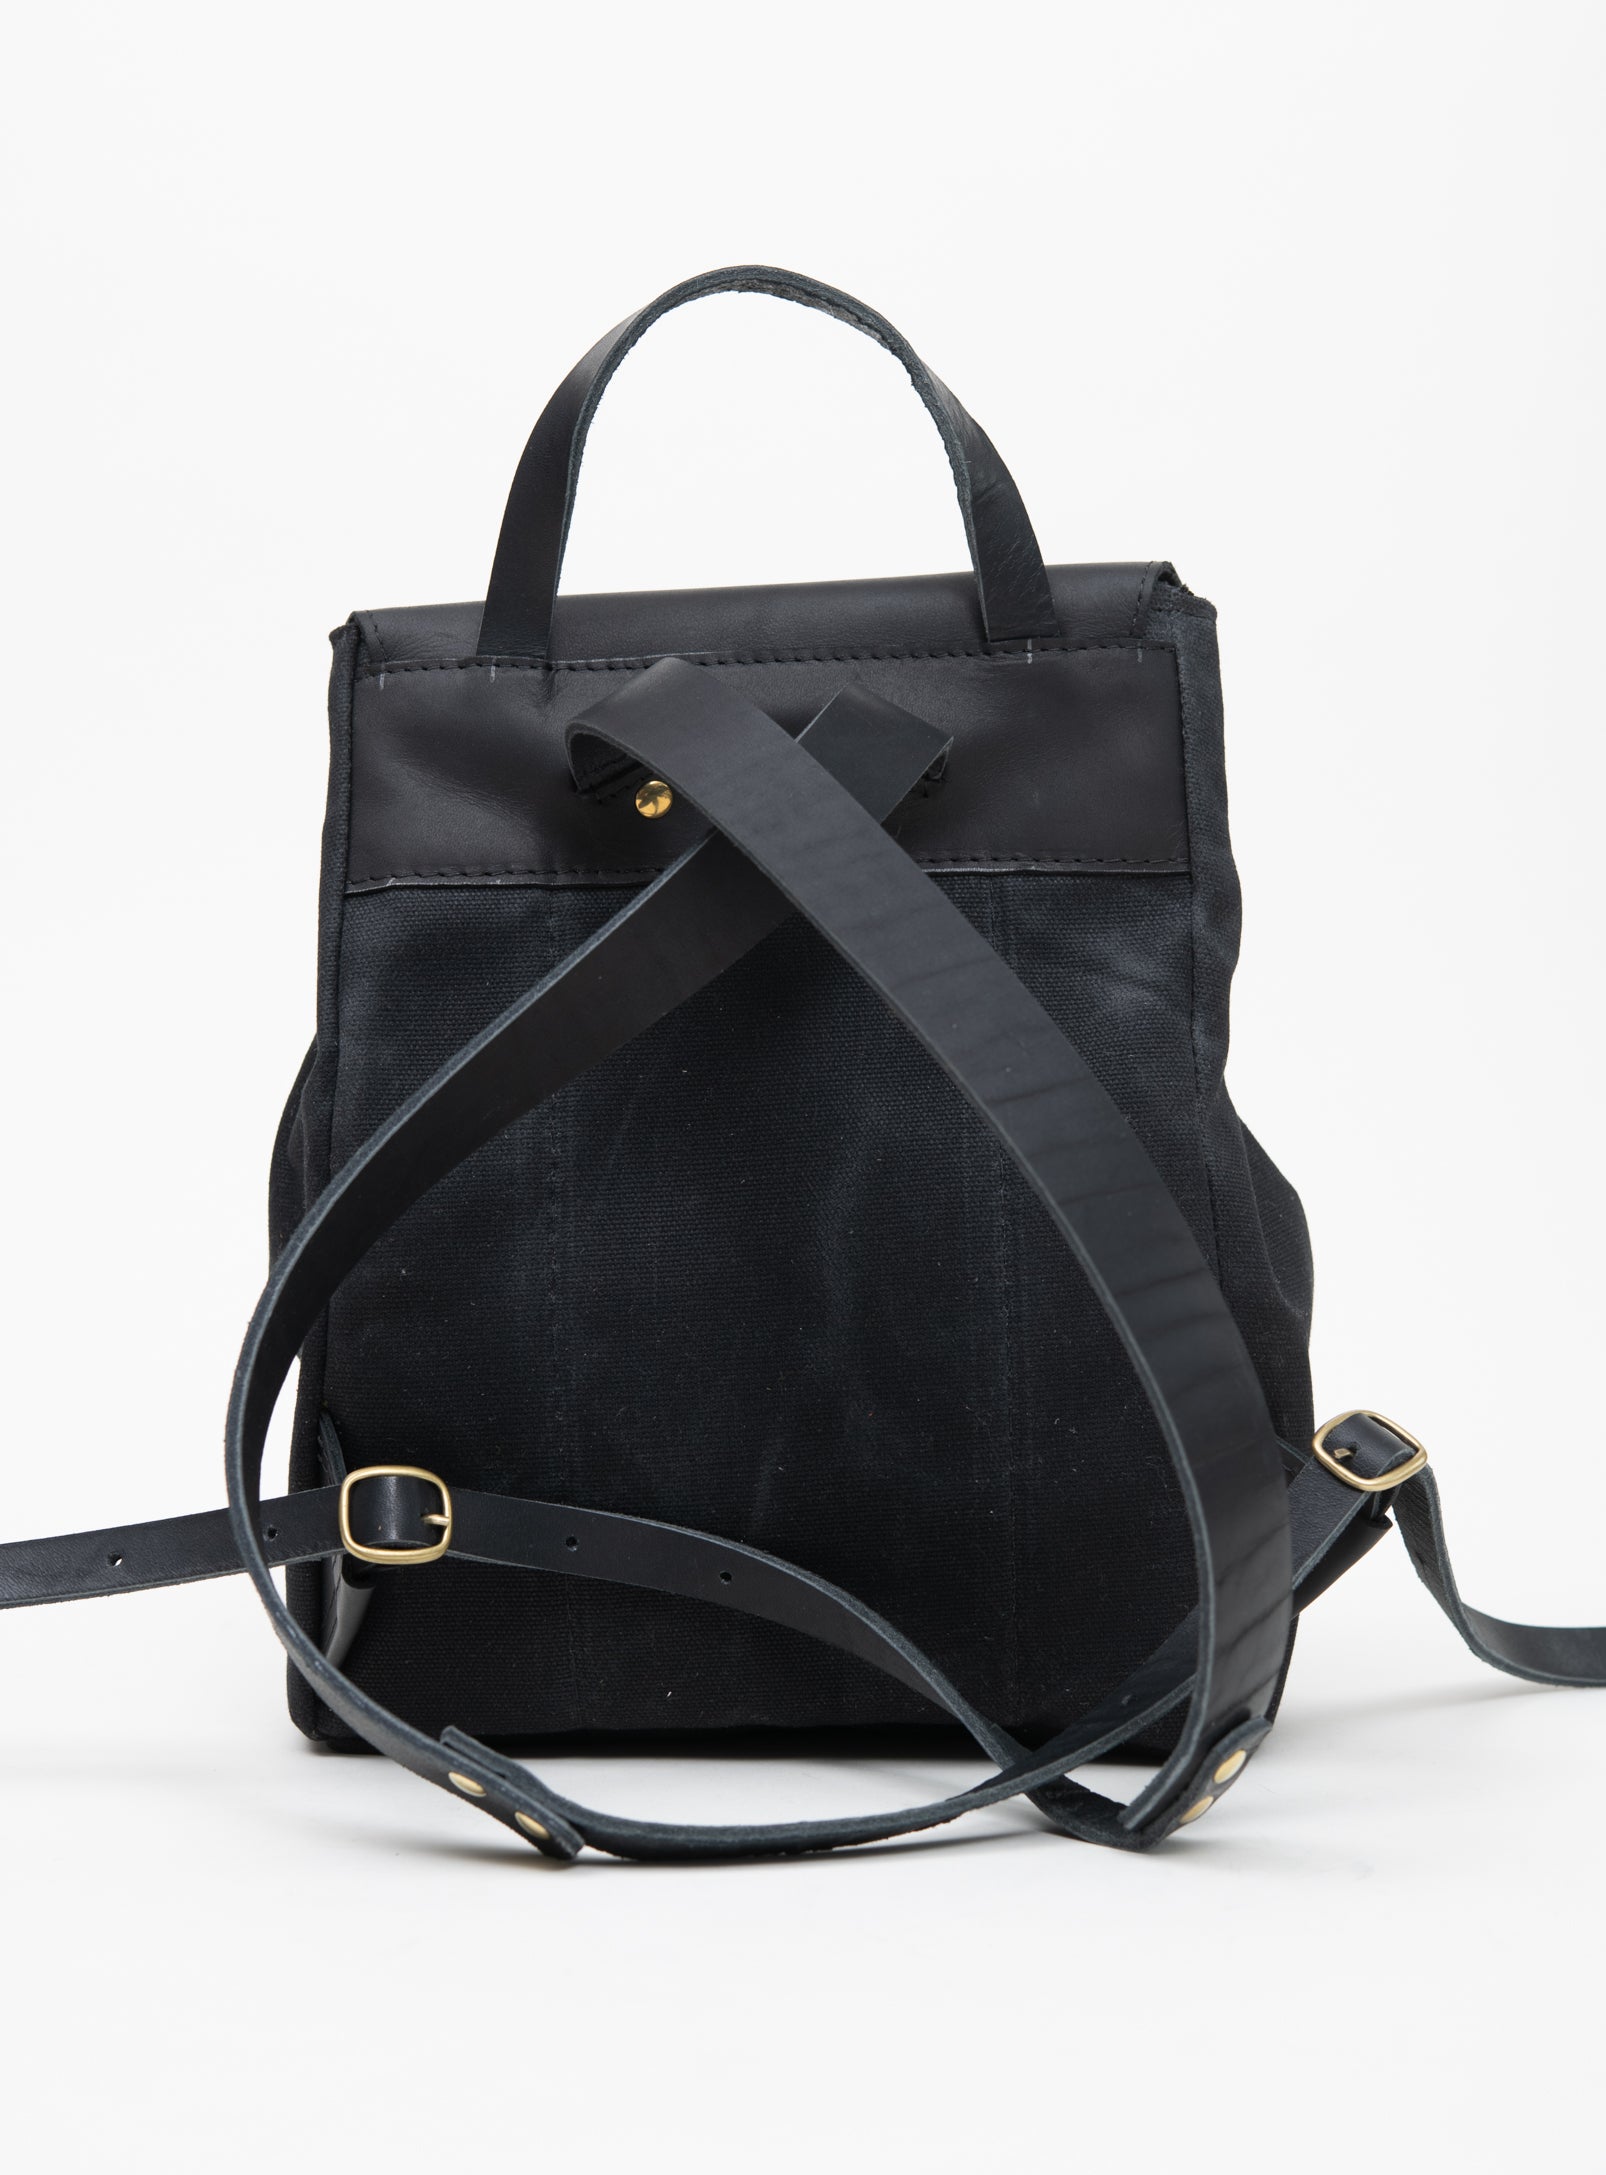 Veinage Leather and Waxed Cotton Rucksack MILAN Model Small, handmade in Montreal, Canada